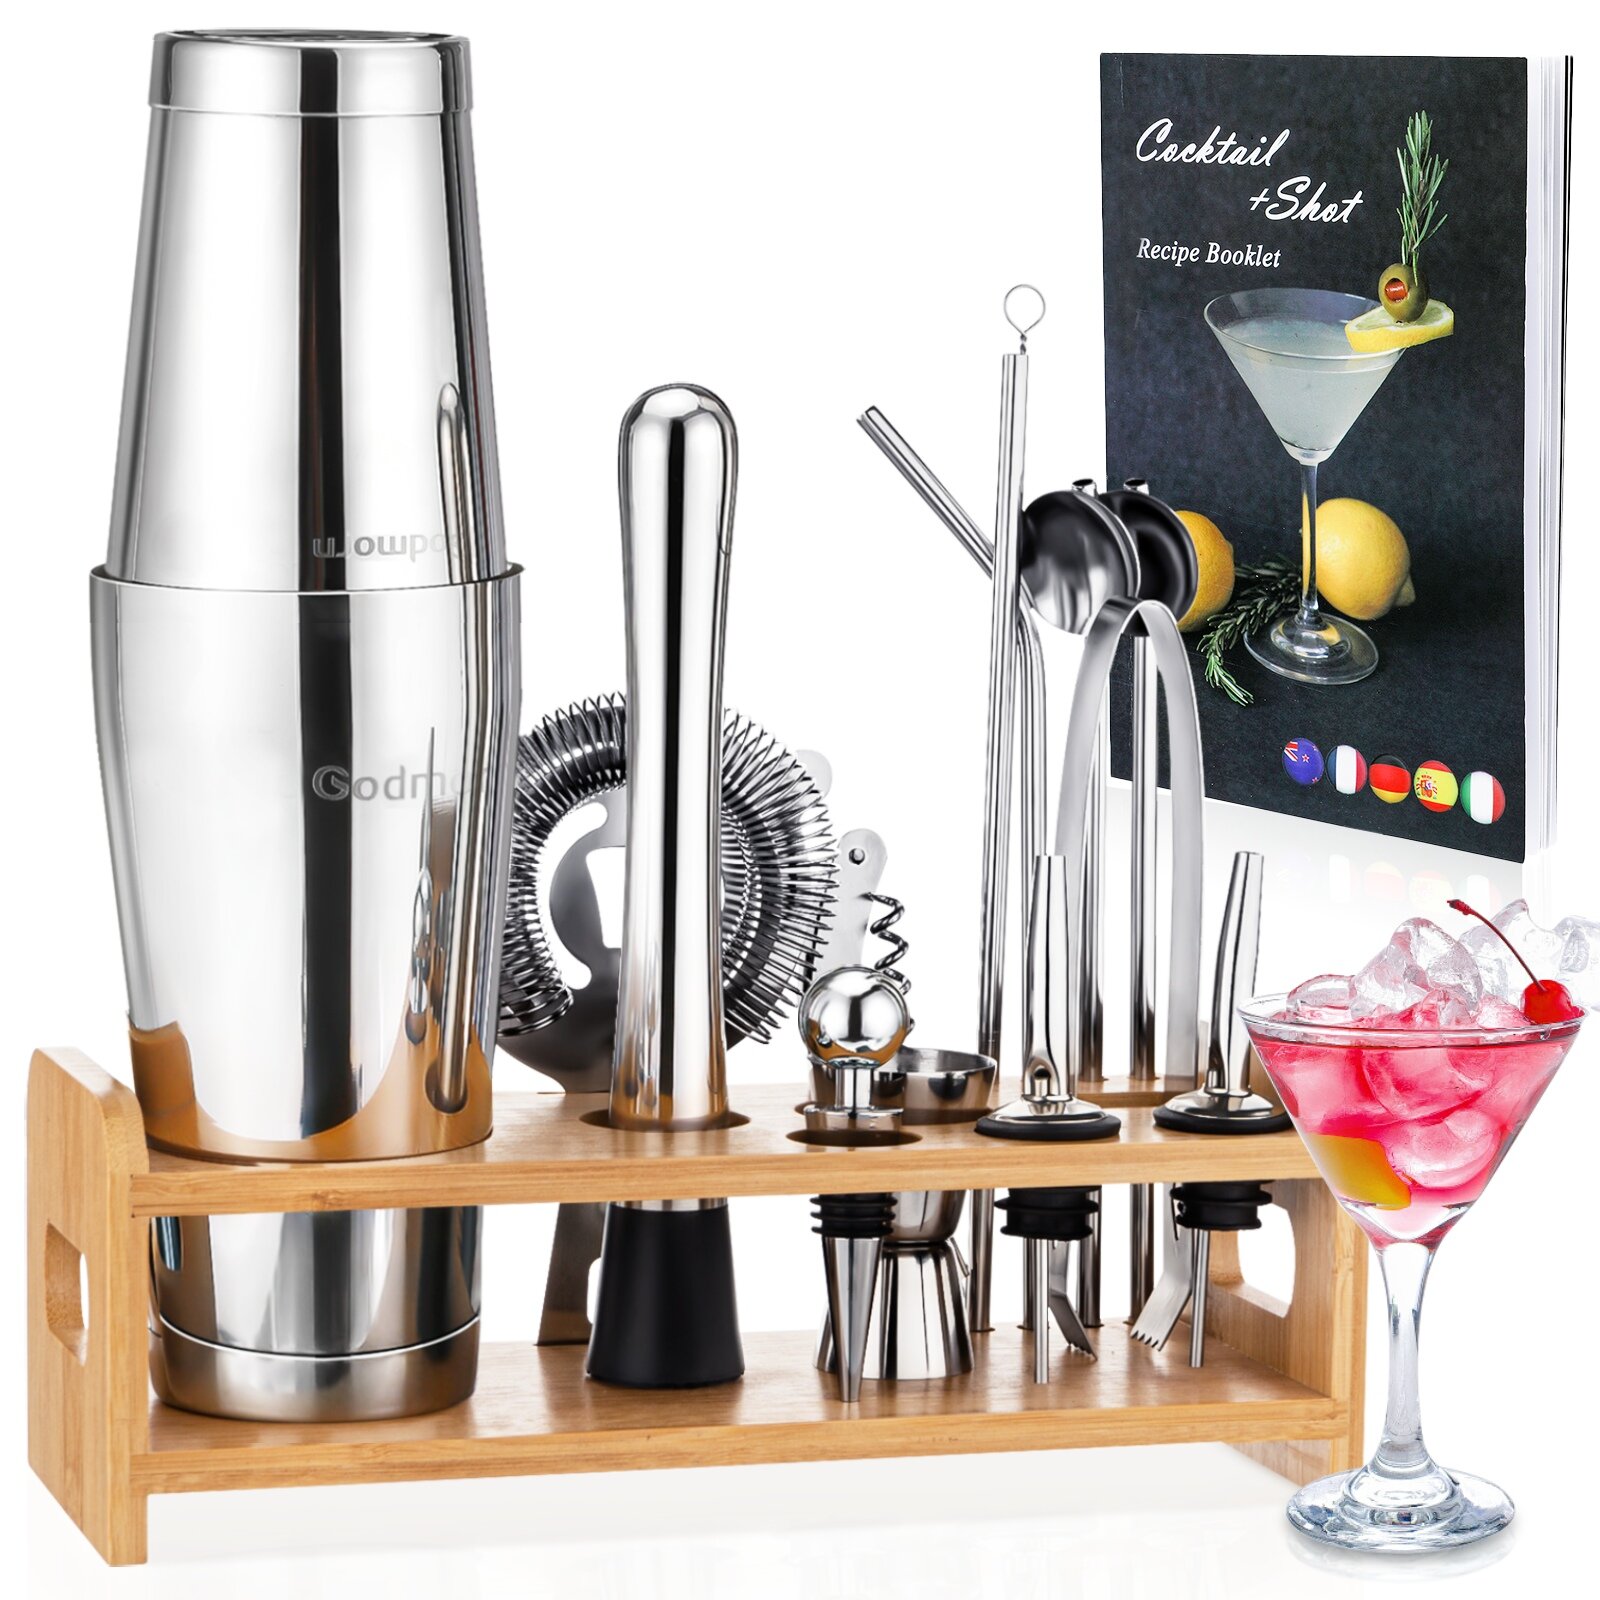 

Stainless Steel 22oz Cocktail Shaker Set with Wood Stand - 16 Piece Bartender Kit with Drink Shaker, Bar Spoon, Jigger,